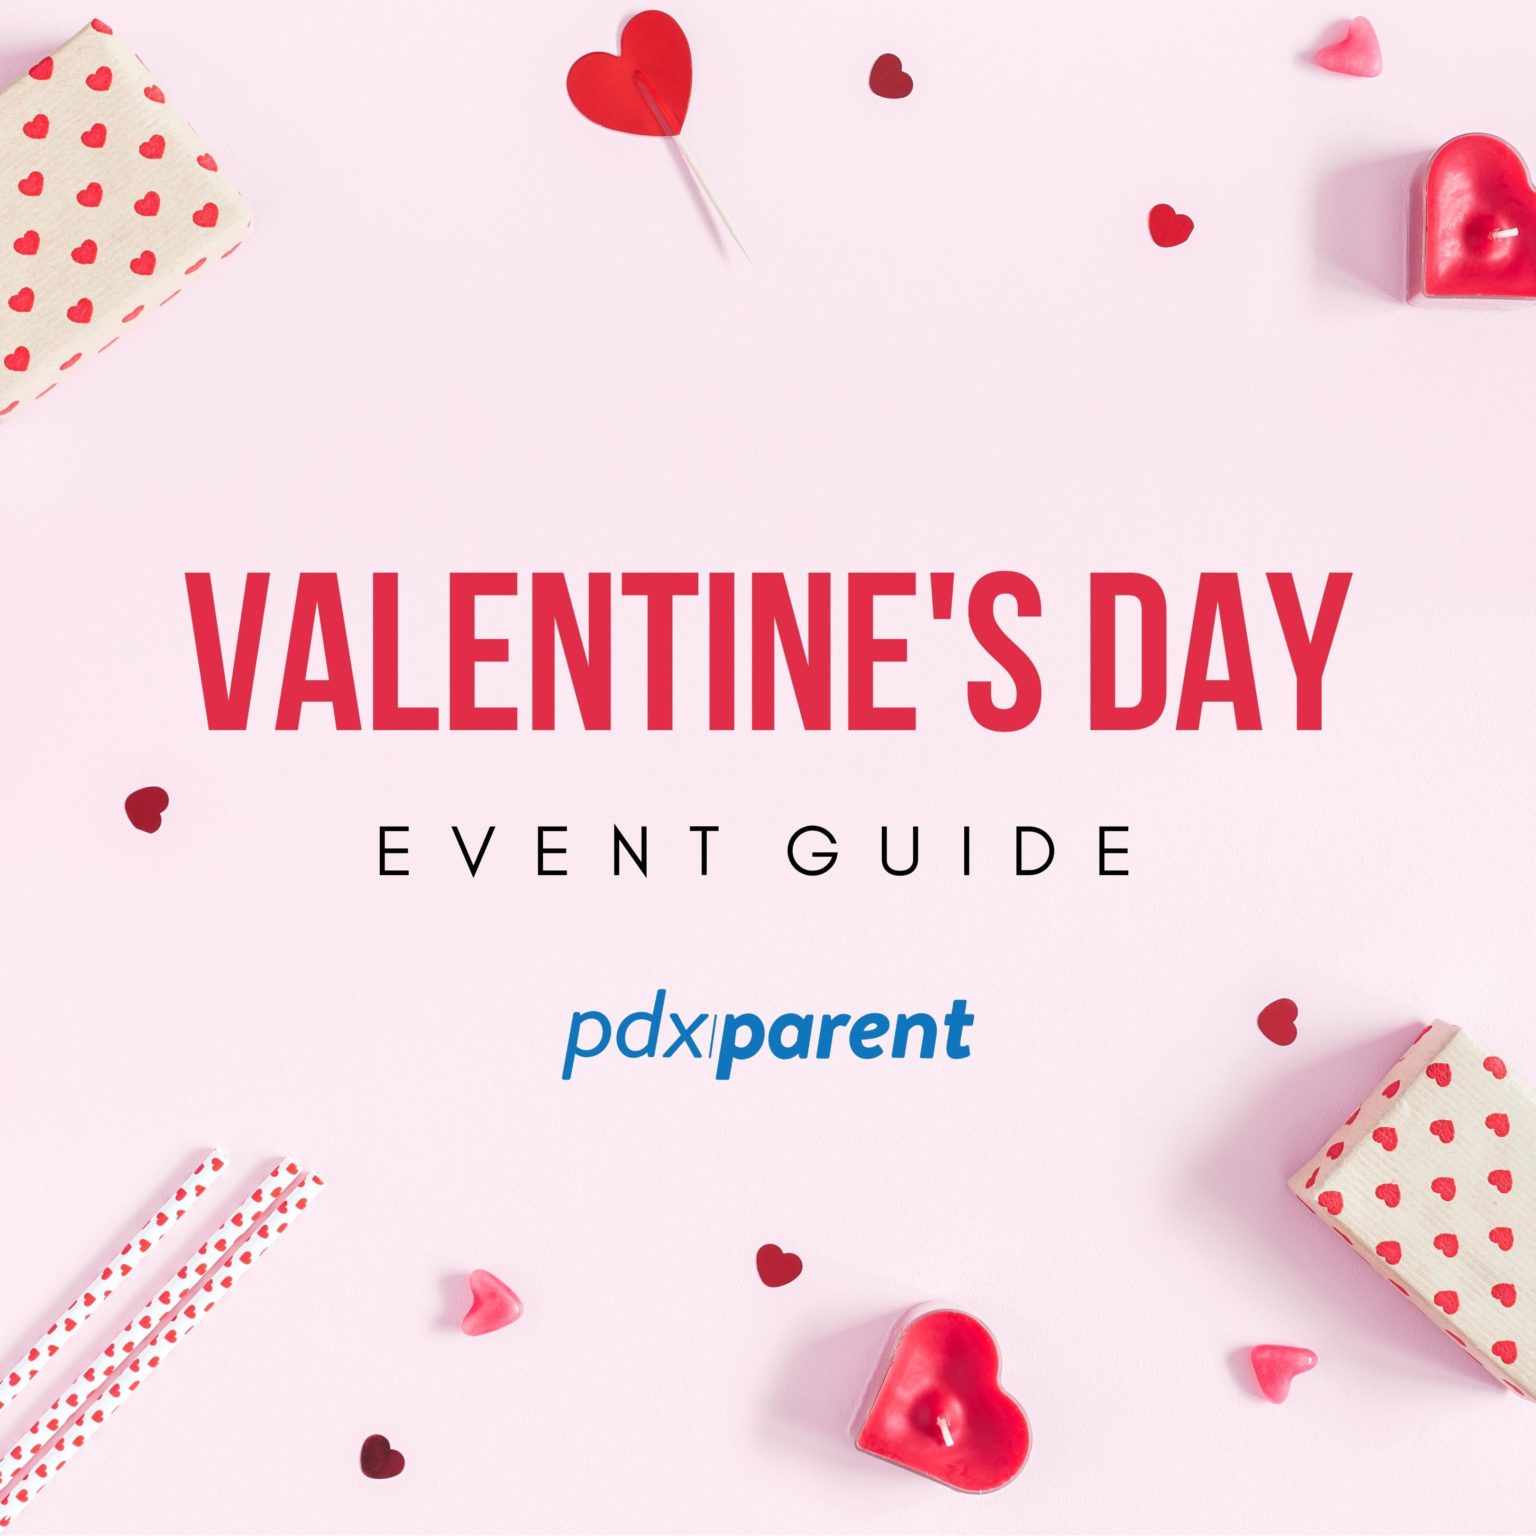 valentine-s-day-event-guide-pdx-parent